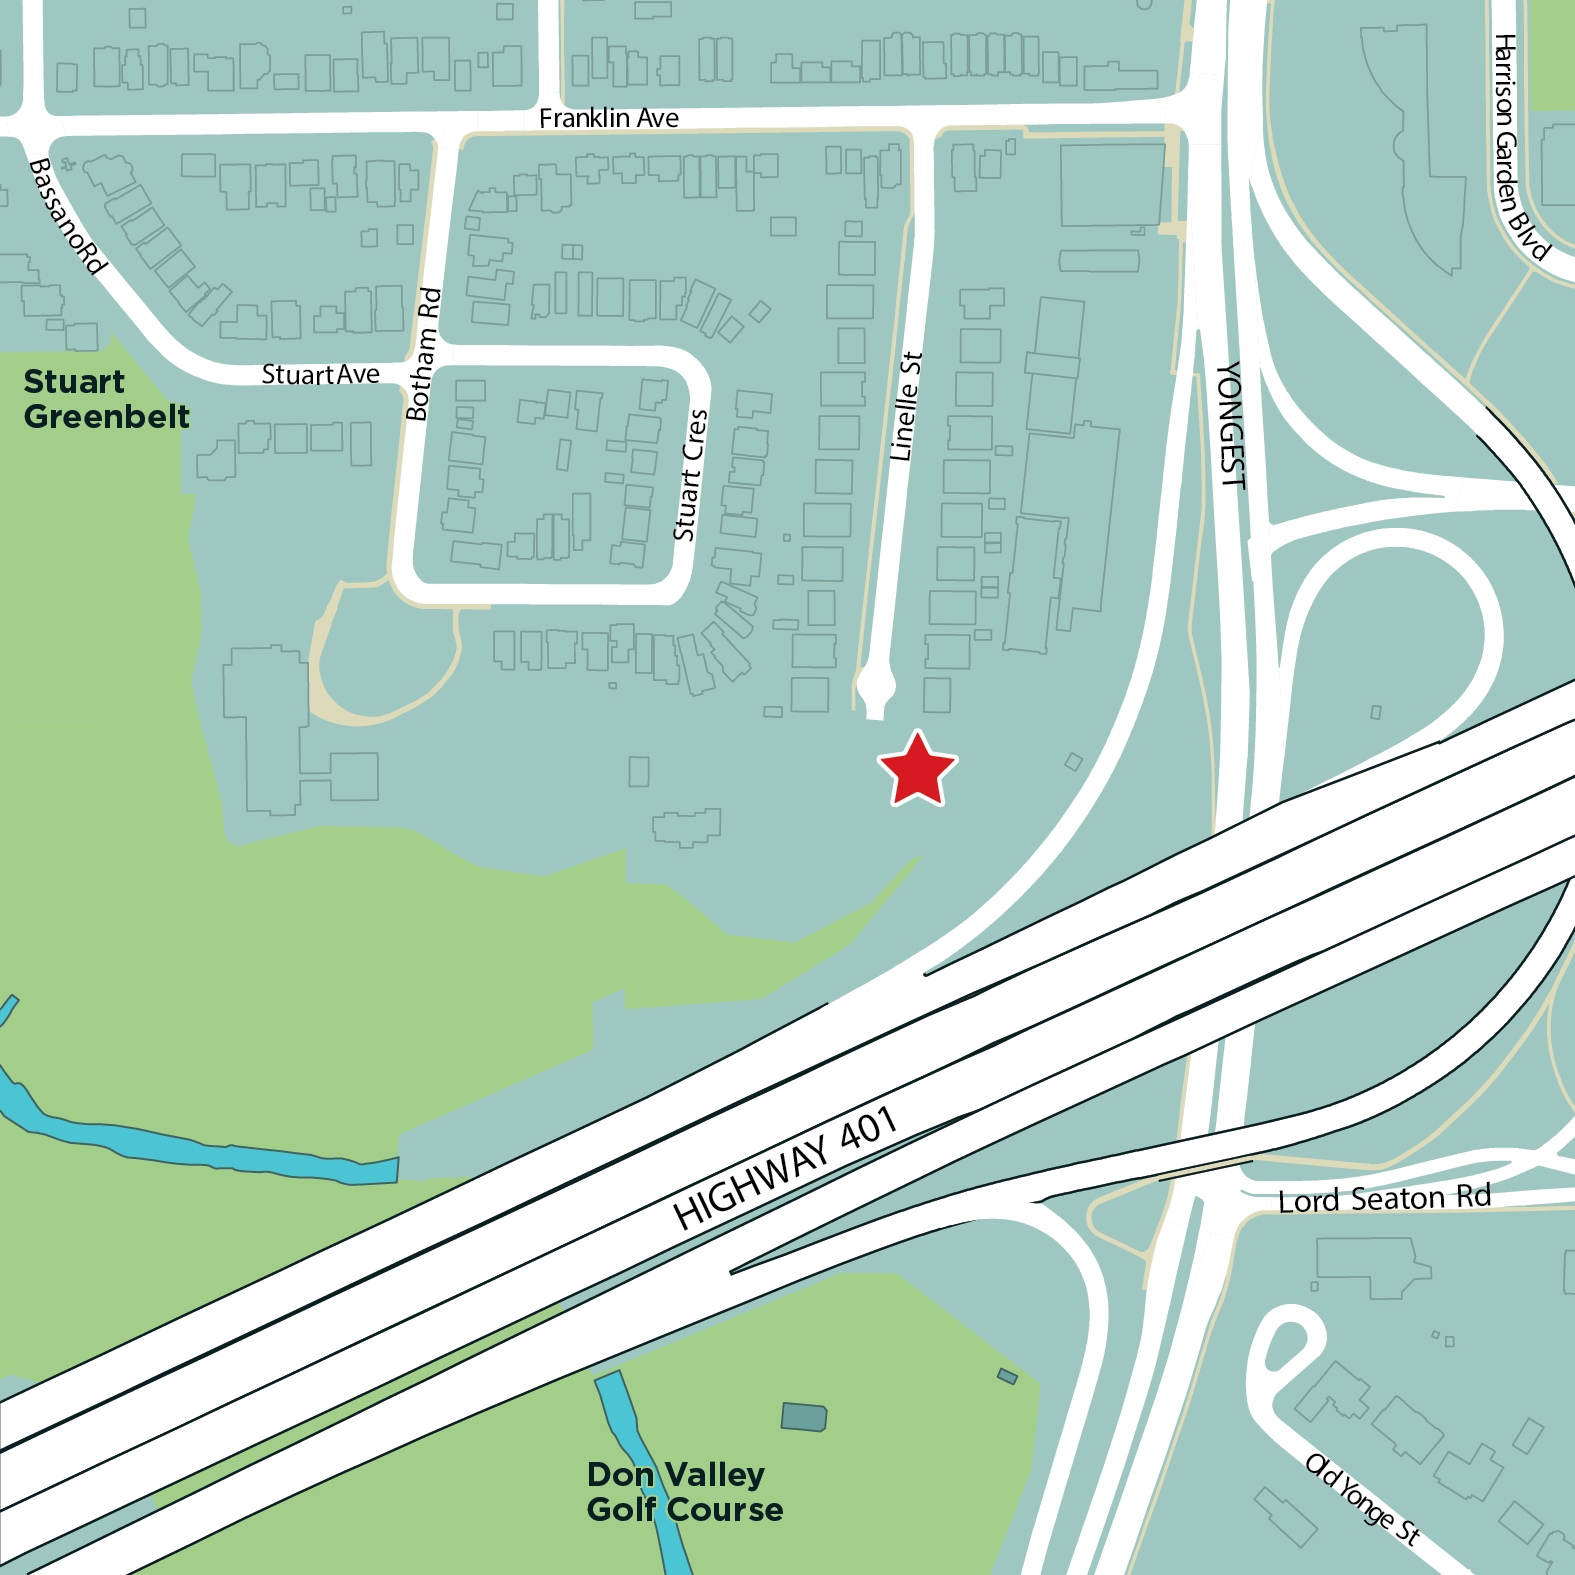 Aerial map showing the location of the new park at 57 Linelle Street, west of Yonge Street and north of Highway 401. A red star indicates where the new park will be located. 